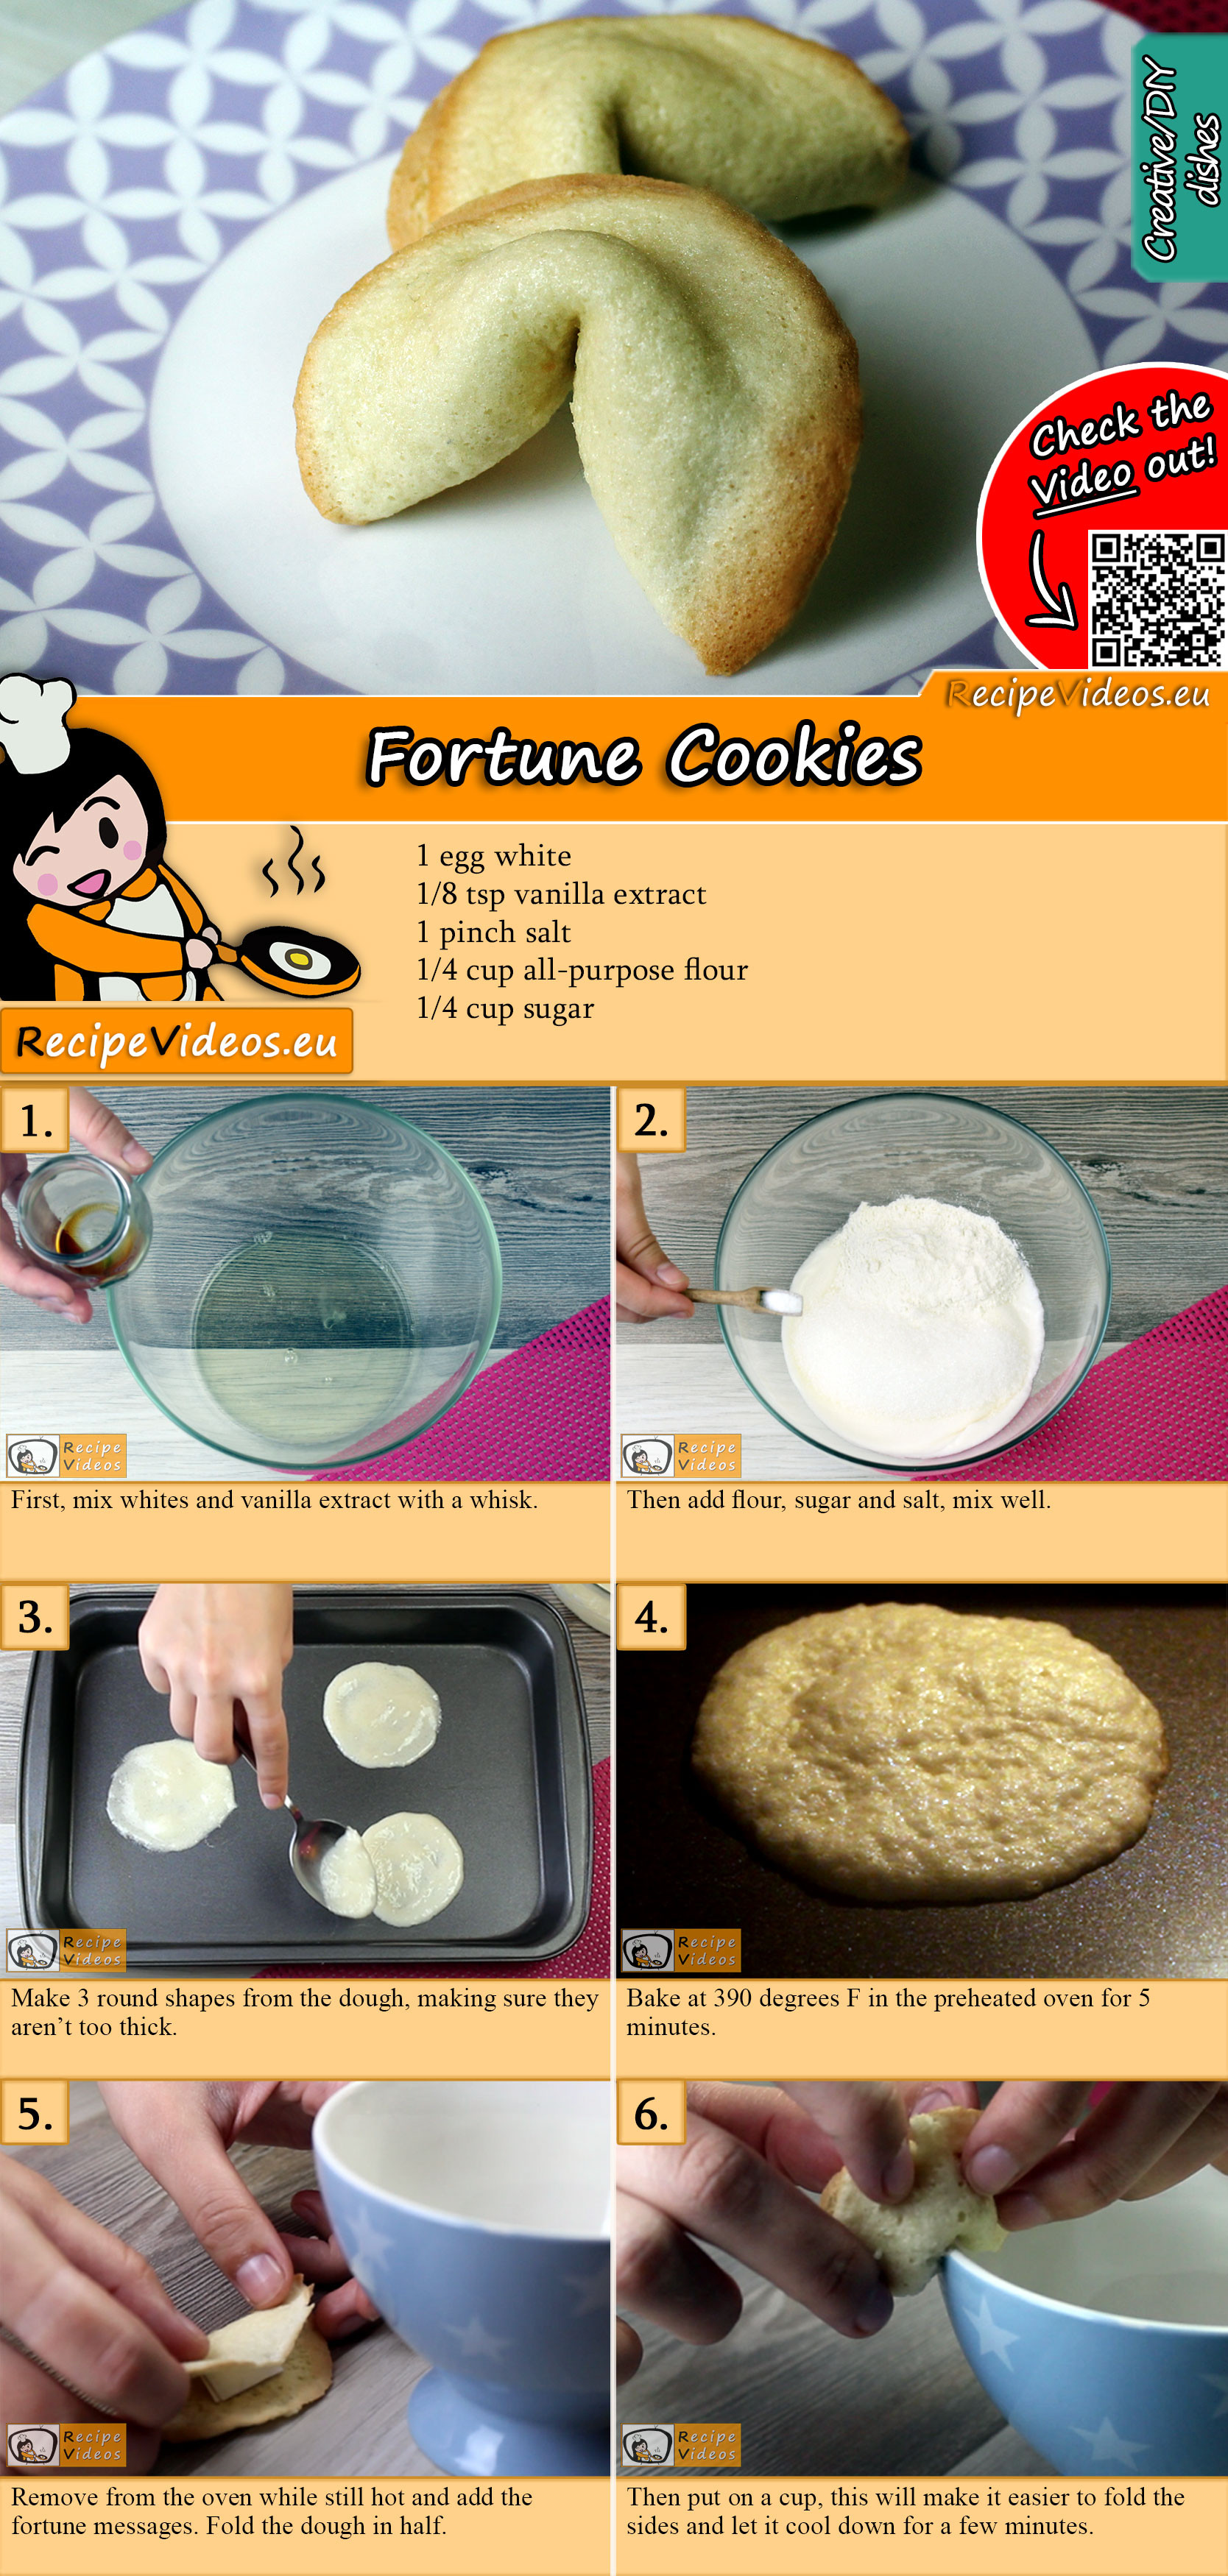 Fortune Cookies recipe with video